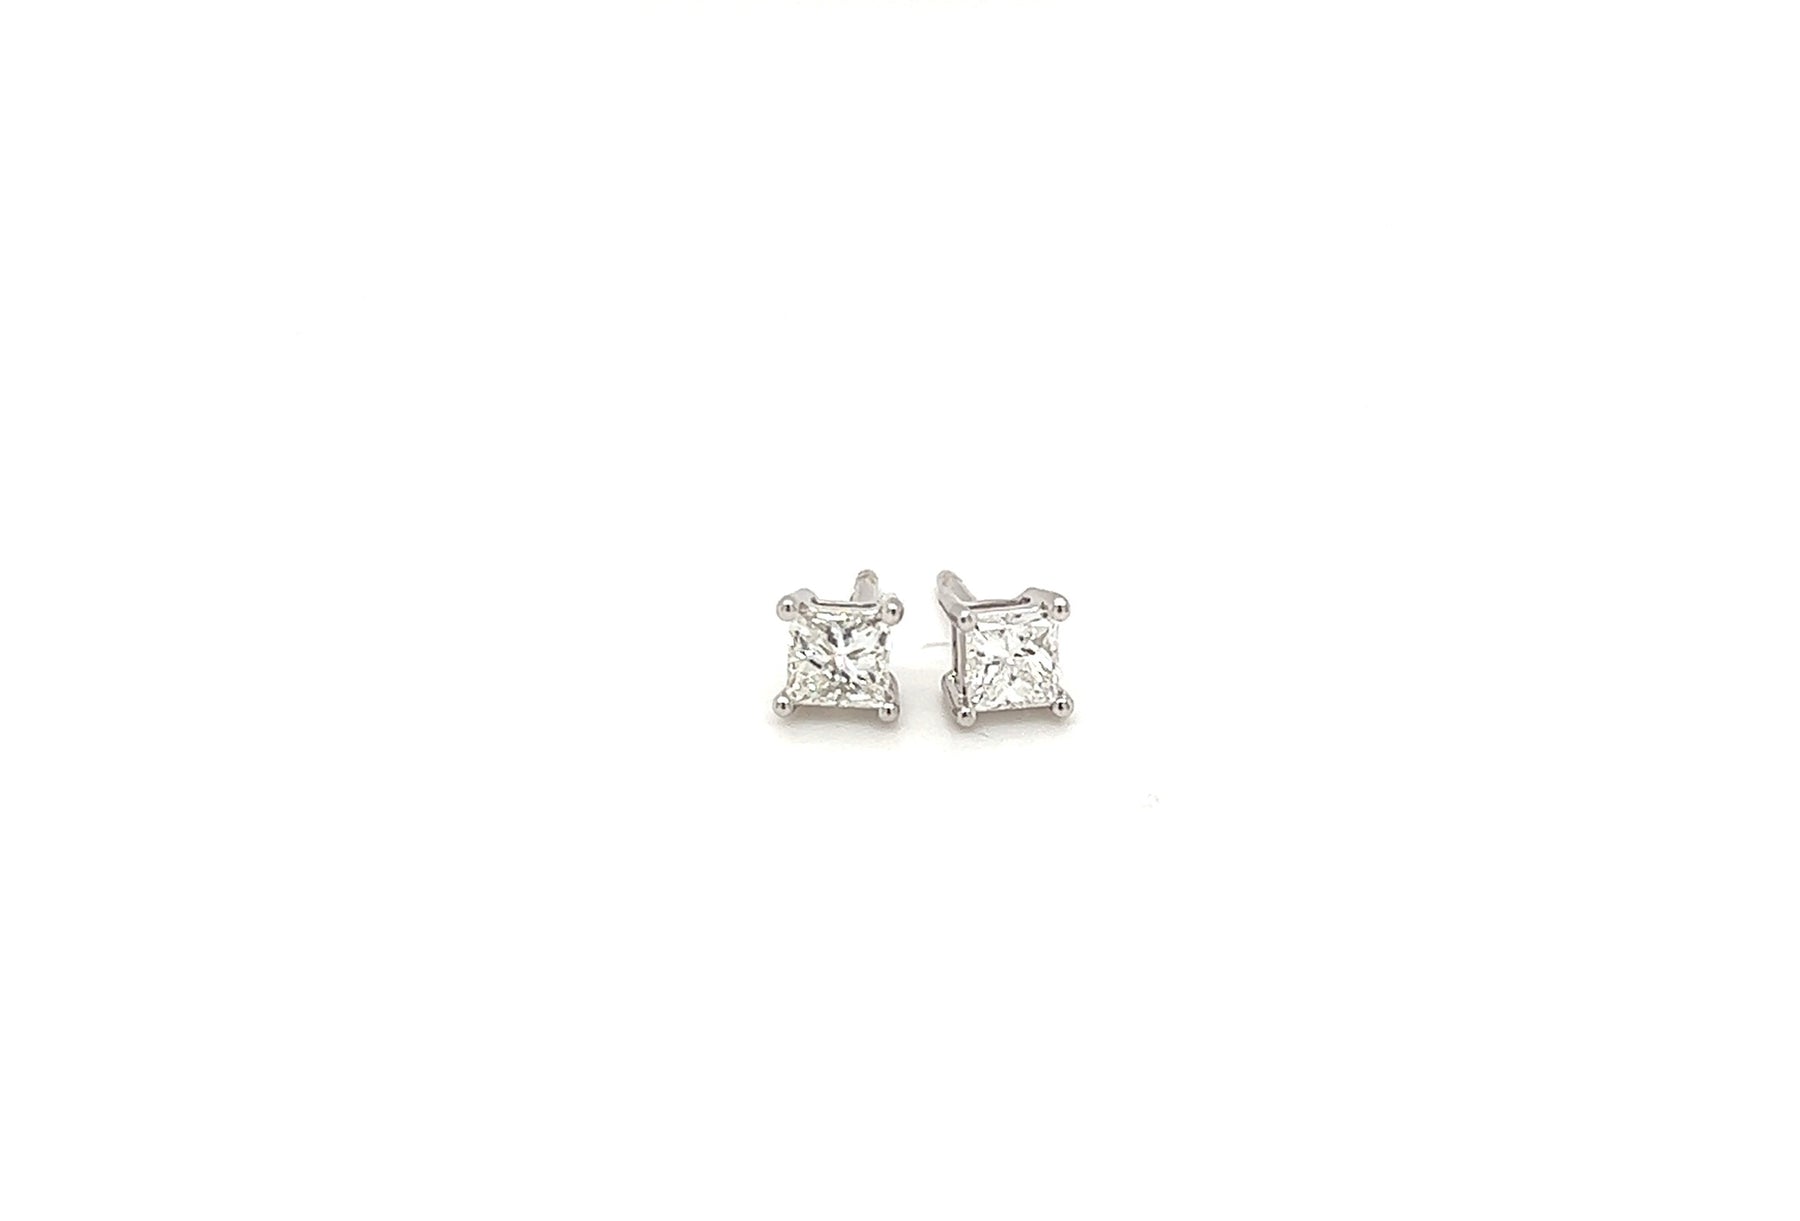 9ct white gold princess cut 4 claw certified diamond stud earrings 0.25